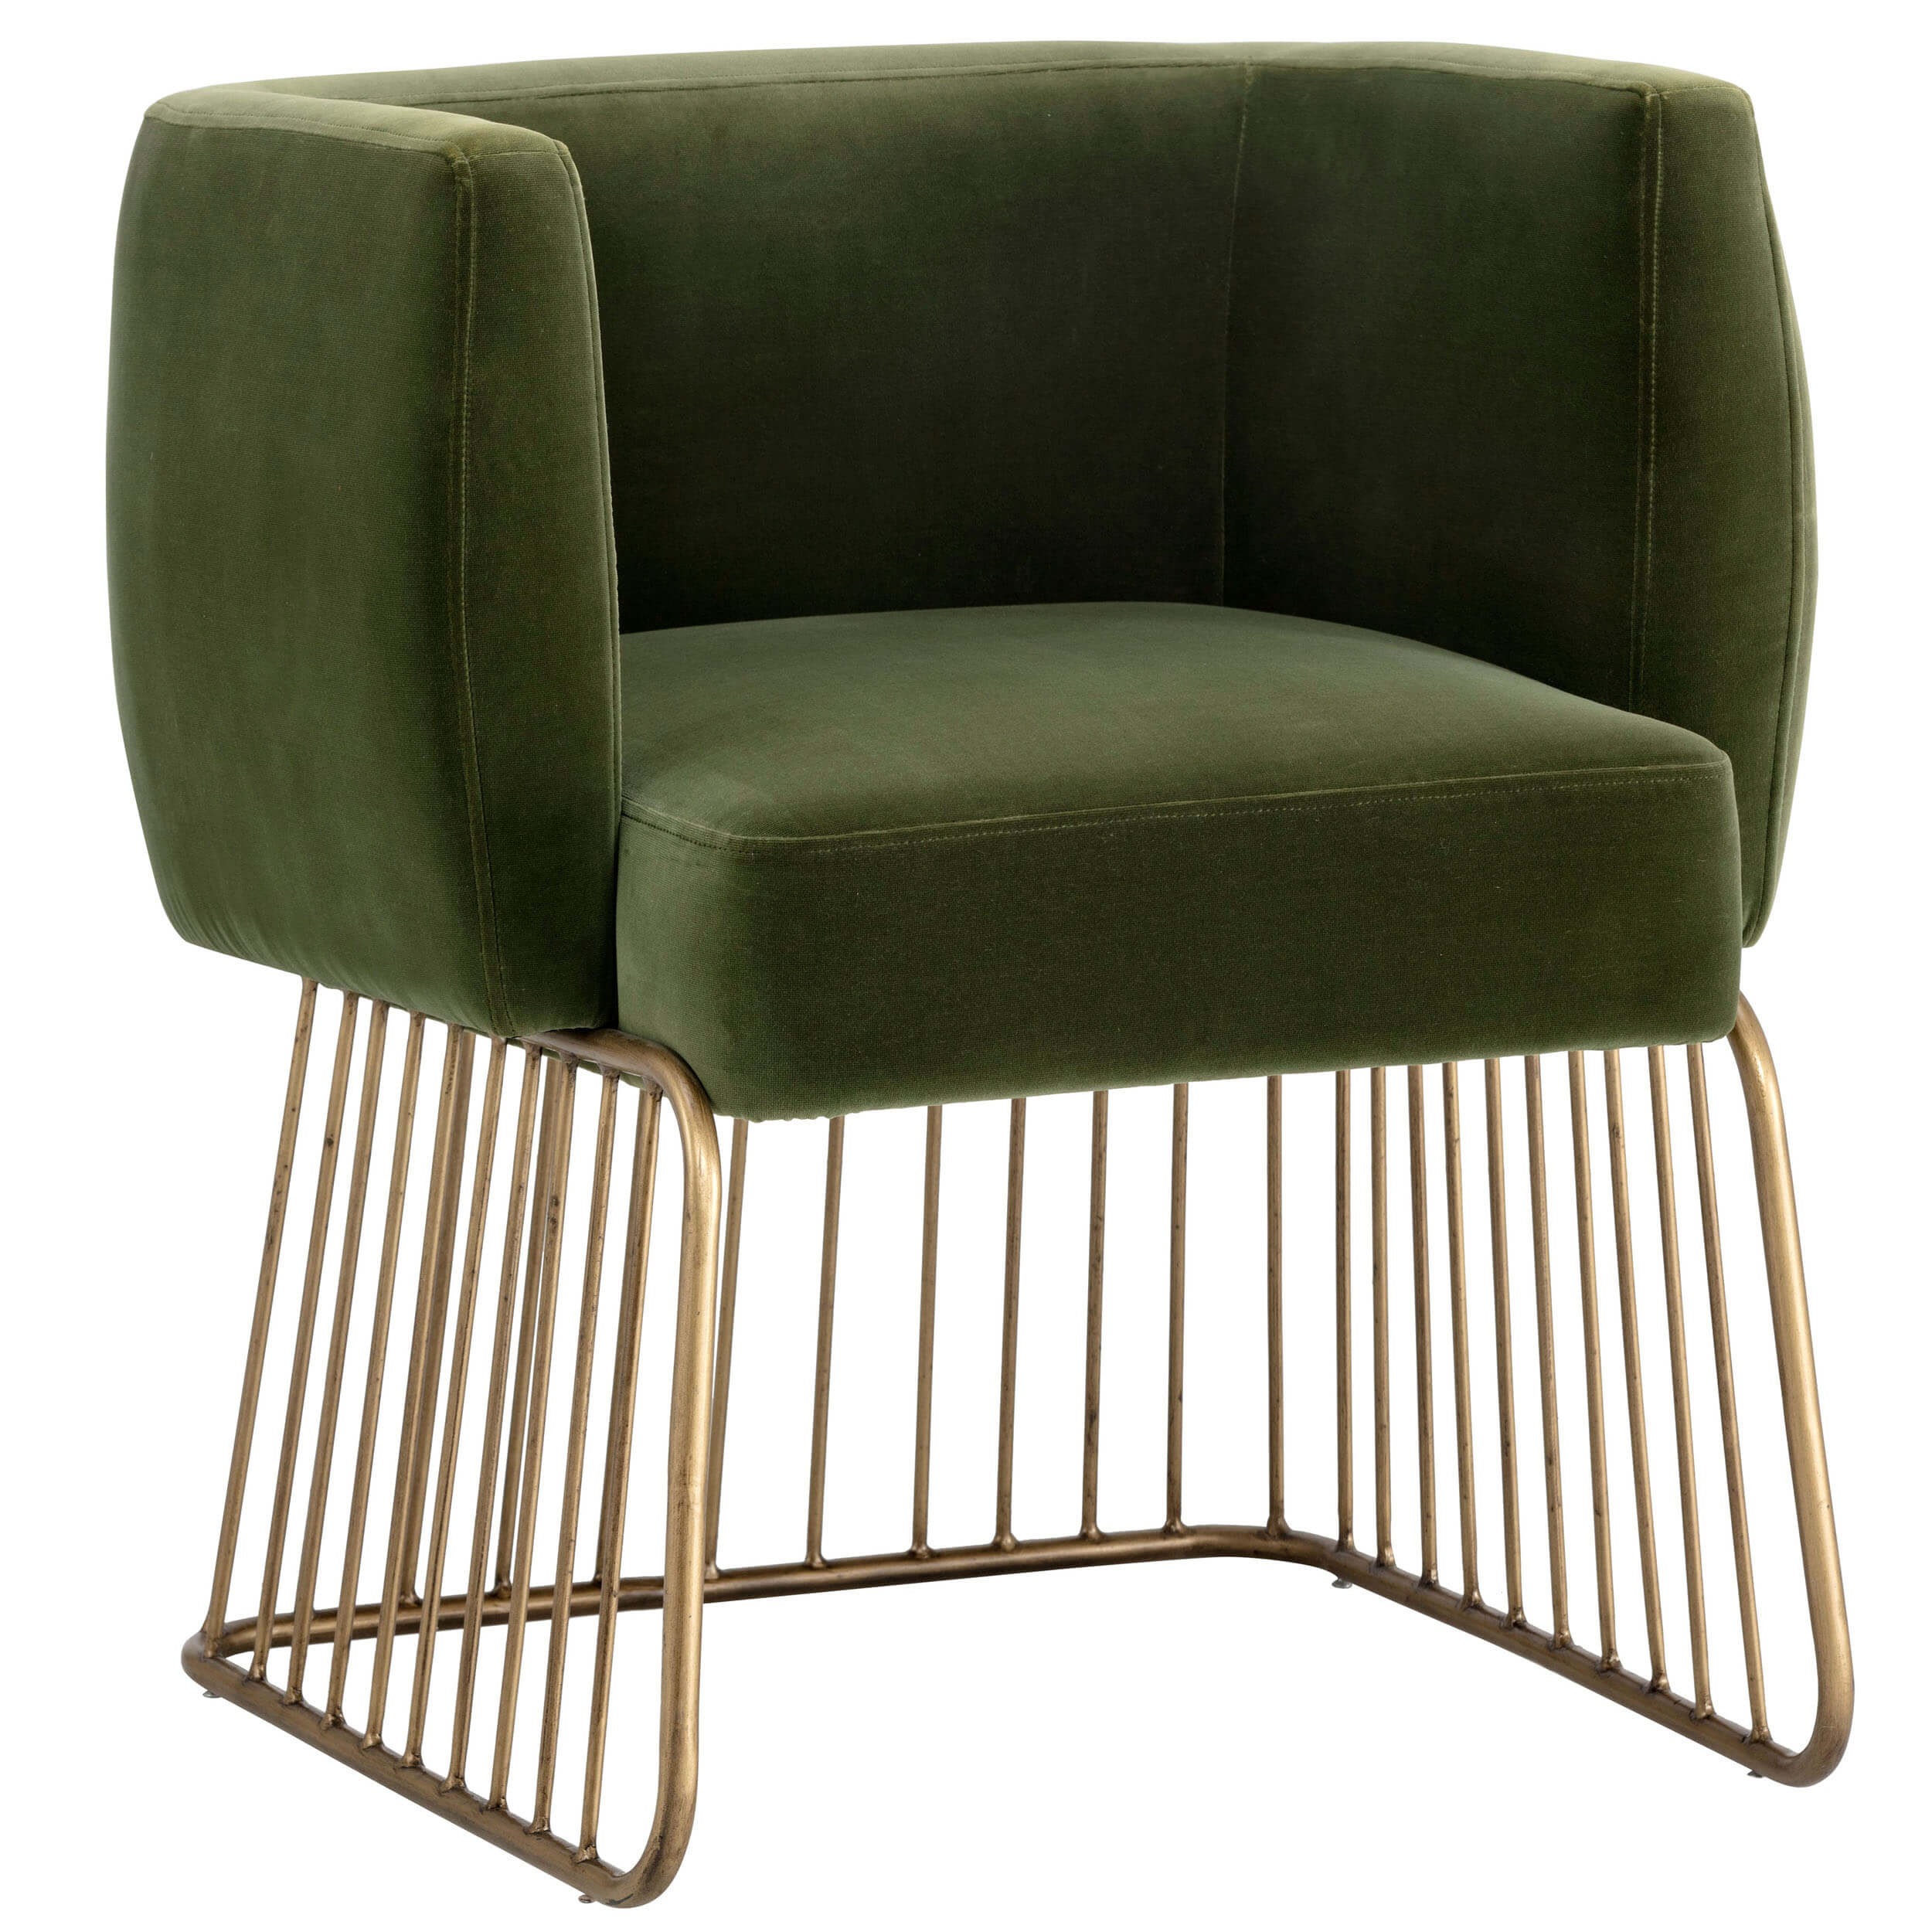 Image of Gala Arm Chair, Forest Green